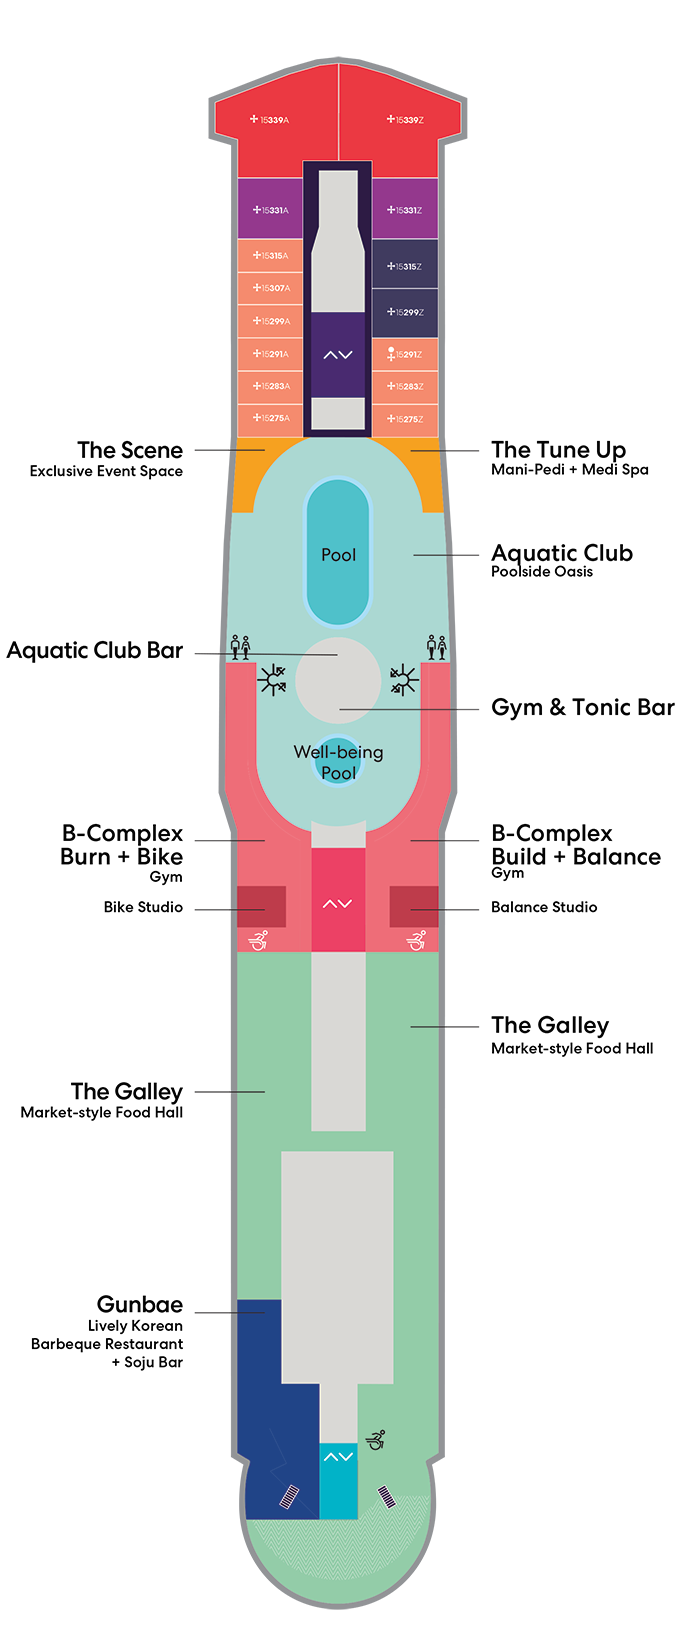 virgin voyages resilient lady layout